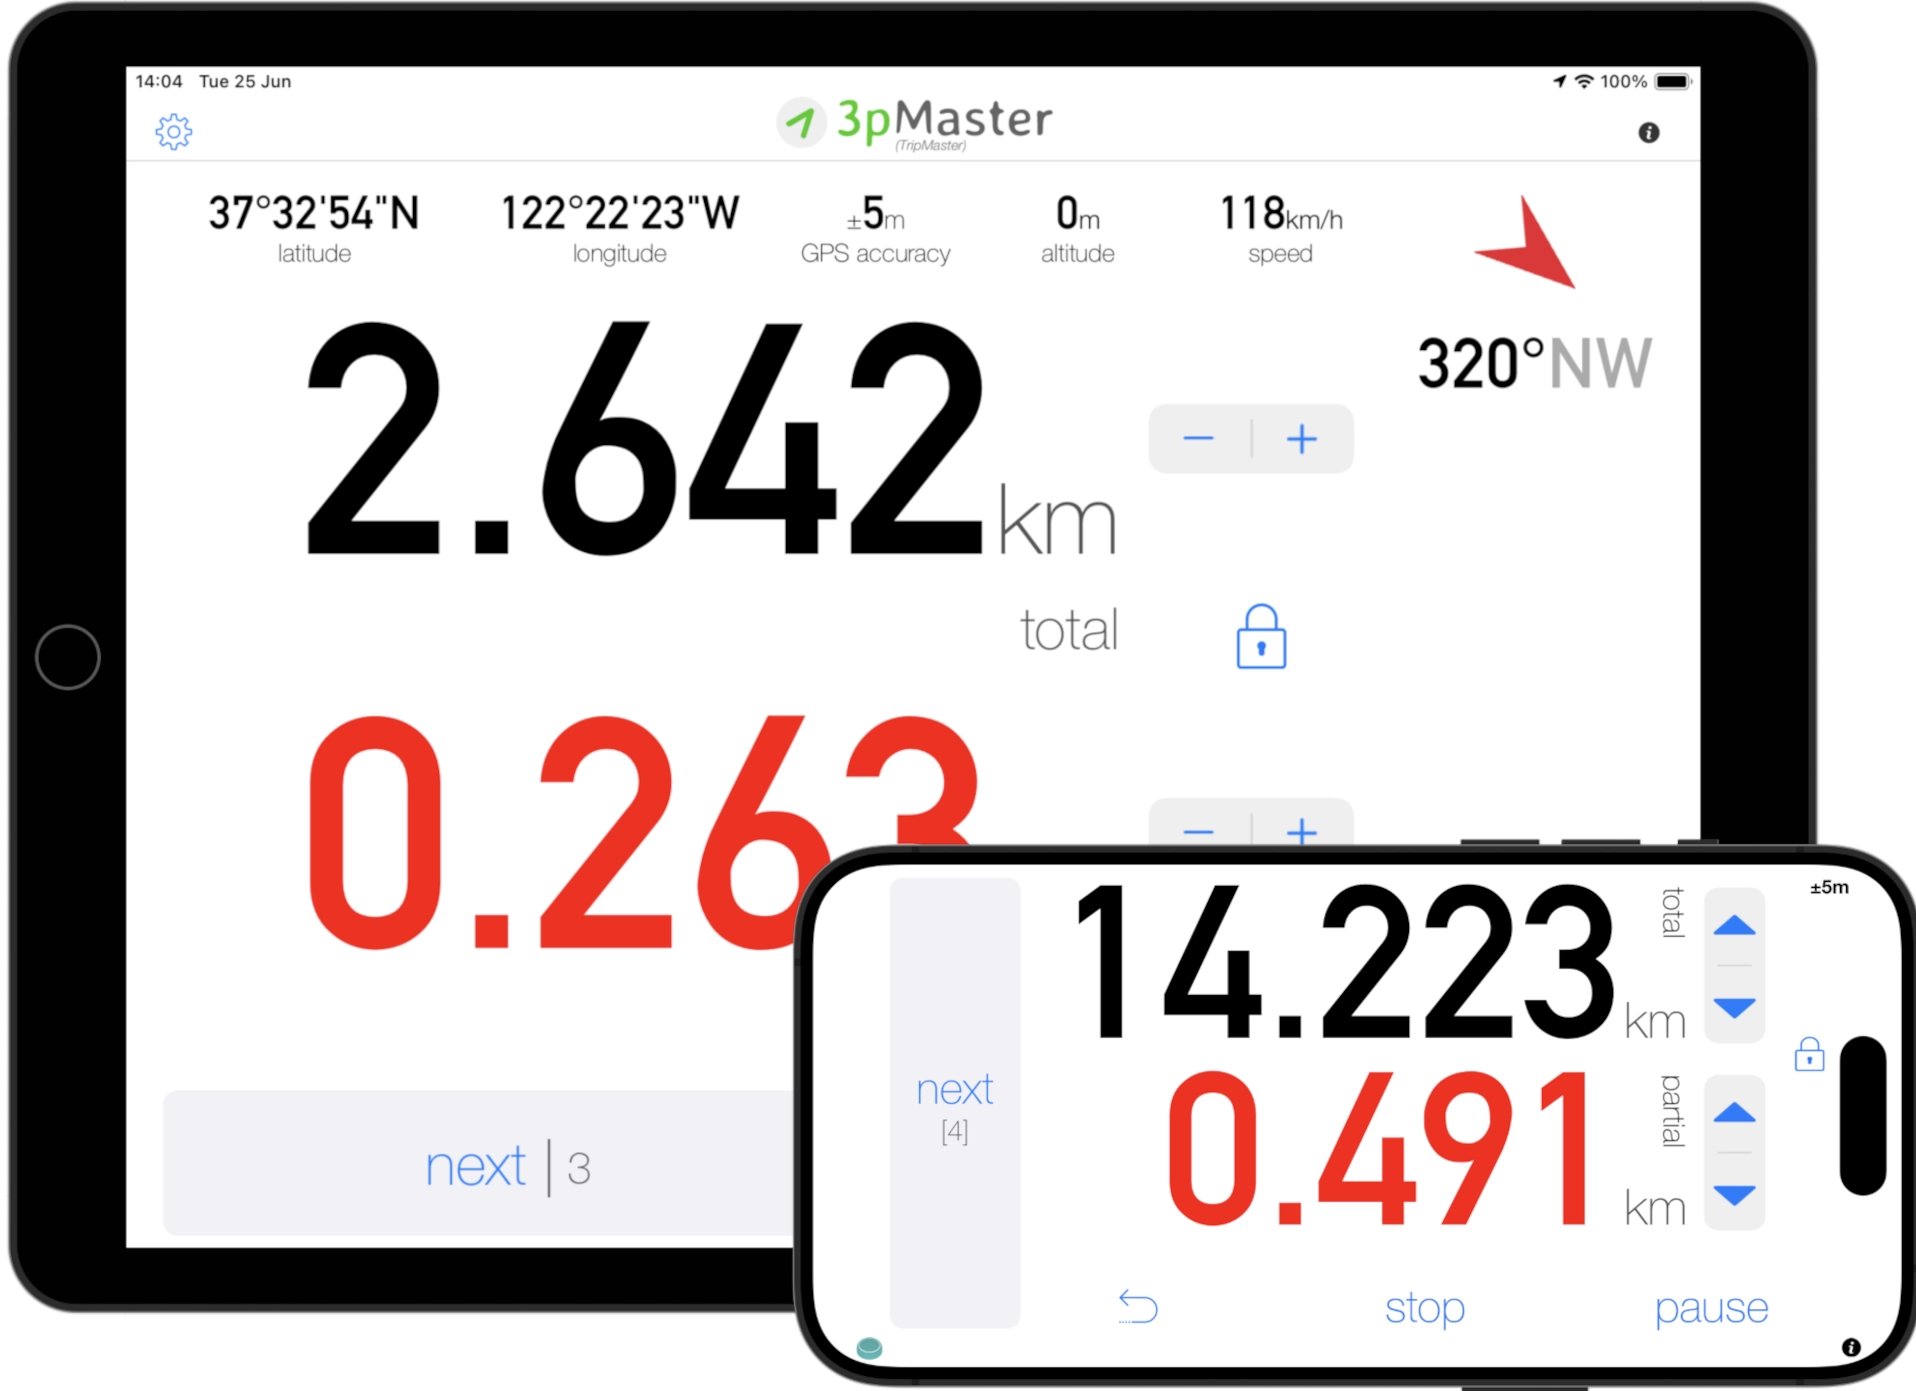 3pMaster - Tripmaster Odometer App for Off-Road for iPad and iPhone